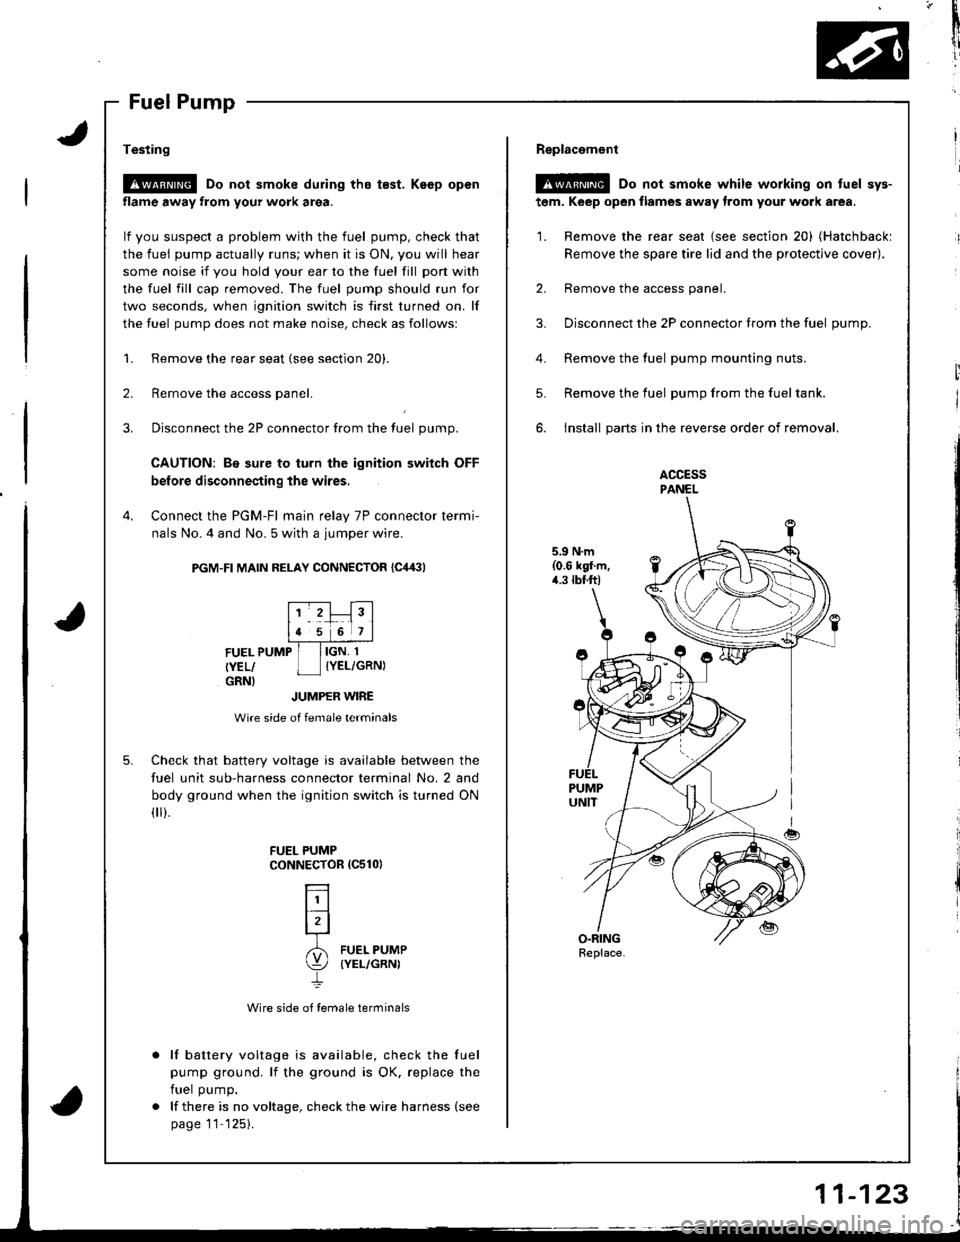 HONDA INTEGRA 1998 4.G Workshop Manual *
1i
v3
I
l
i
I
1.
Testing
!@ Do not smoke during tho t€st. Keep open
flame away from your work area.
lf you suspect a problem with the fuel pump, check that
the fuel pump actually runs; when it is